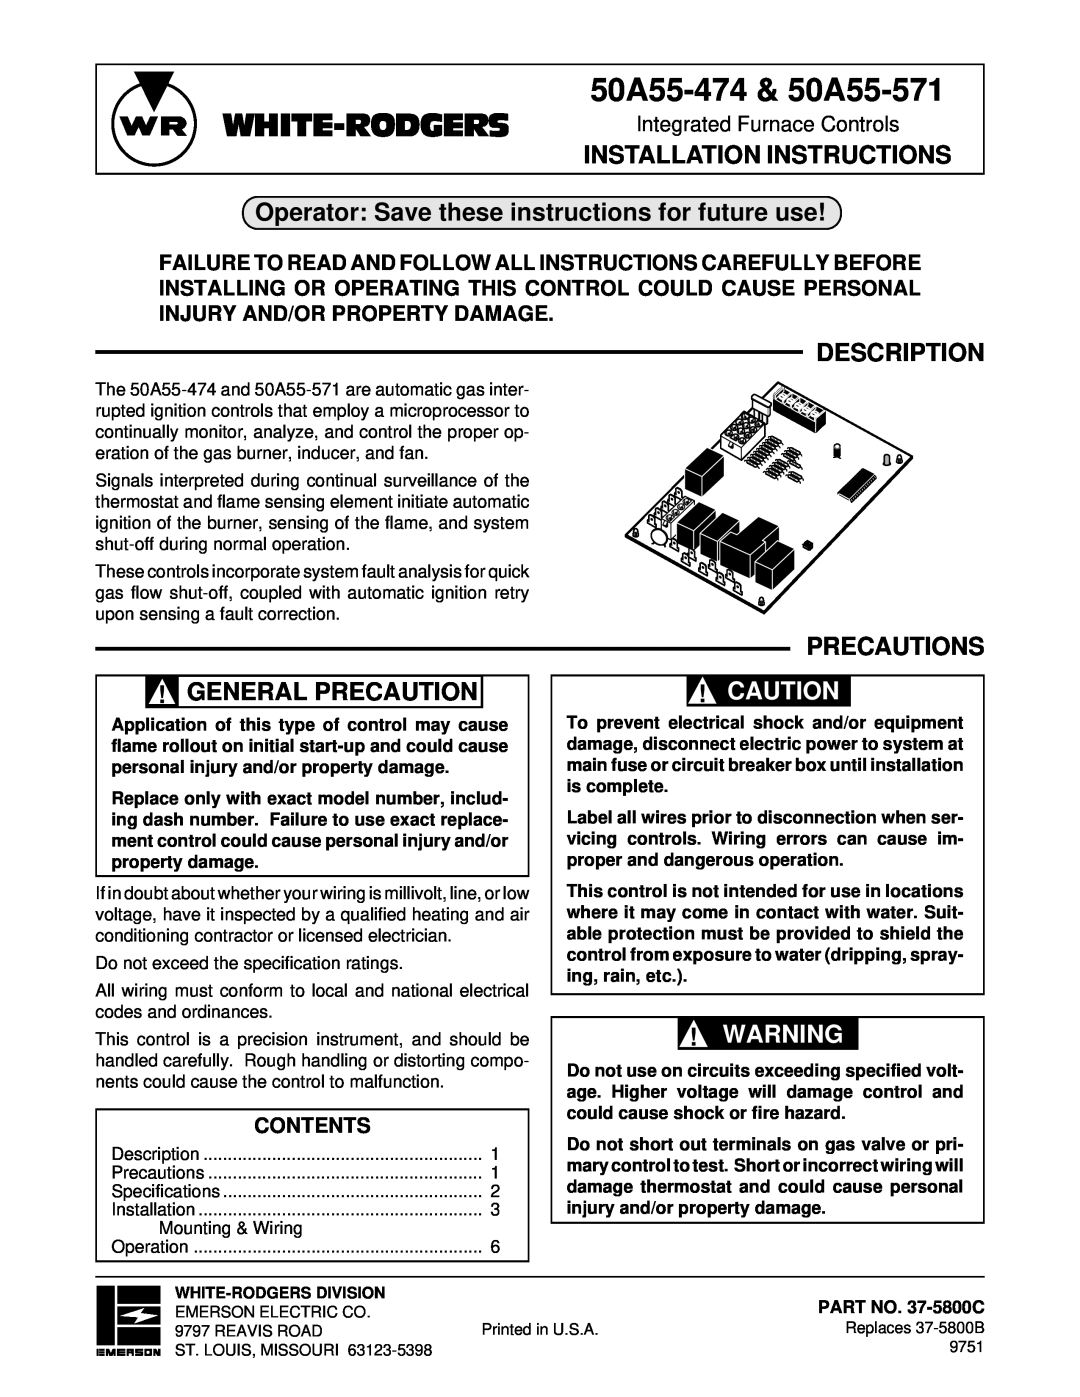 White Rodgers 50A55-571 installation instructions Operator Save these instructions for future use, Description, Contents 